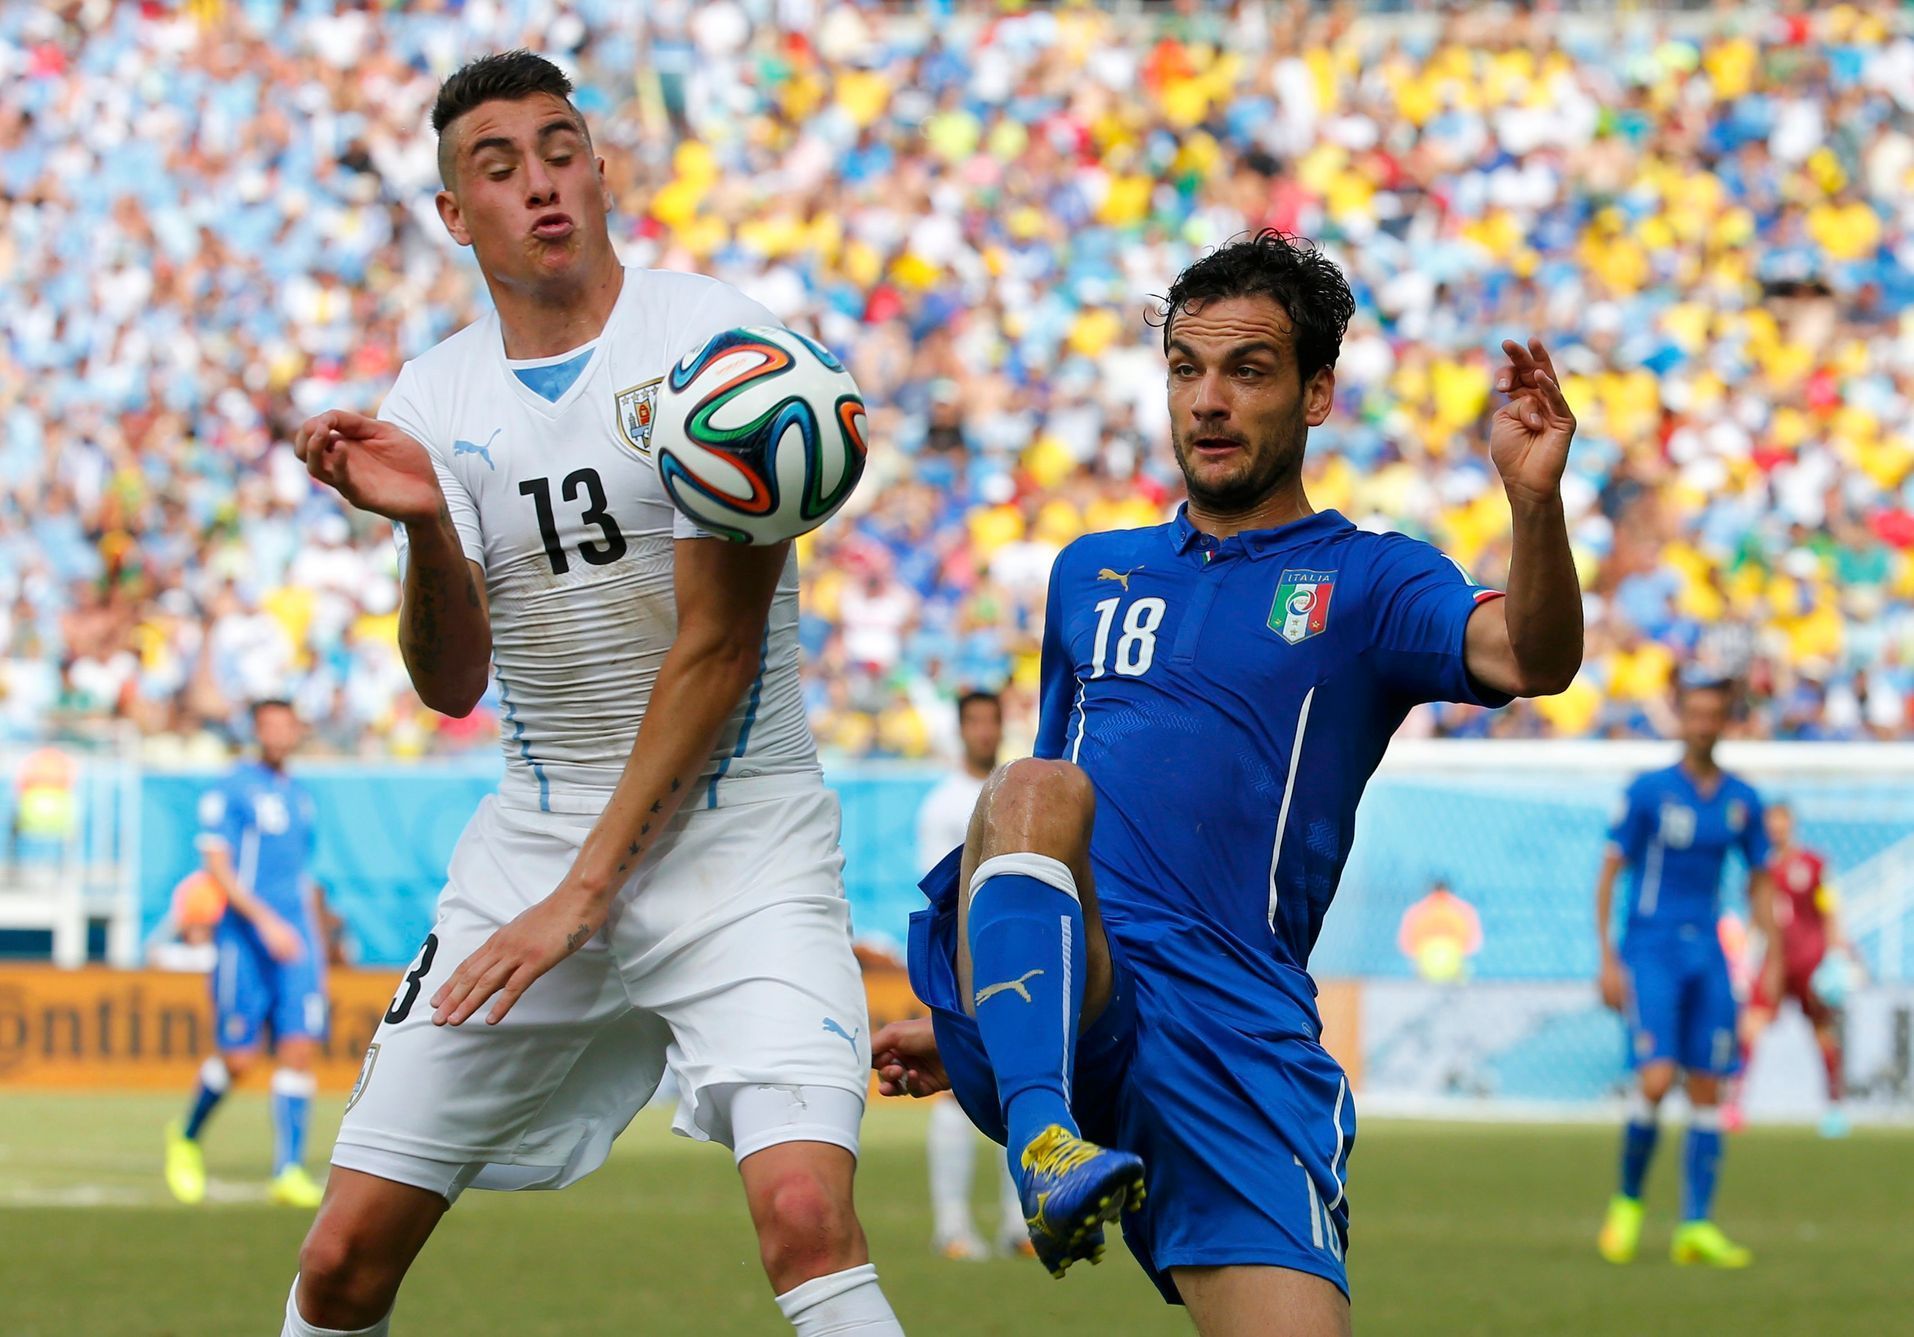 Uruguay's Jose Maria Gimenez fights for the ball with Italy's Marco Parolo during their 2014 World Cup Group D soccer match at the Dunas arena